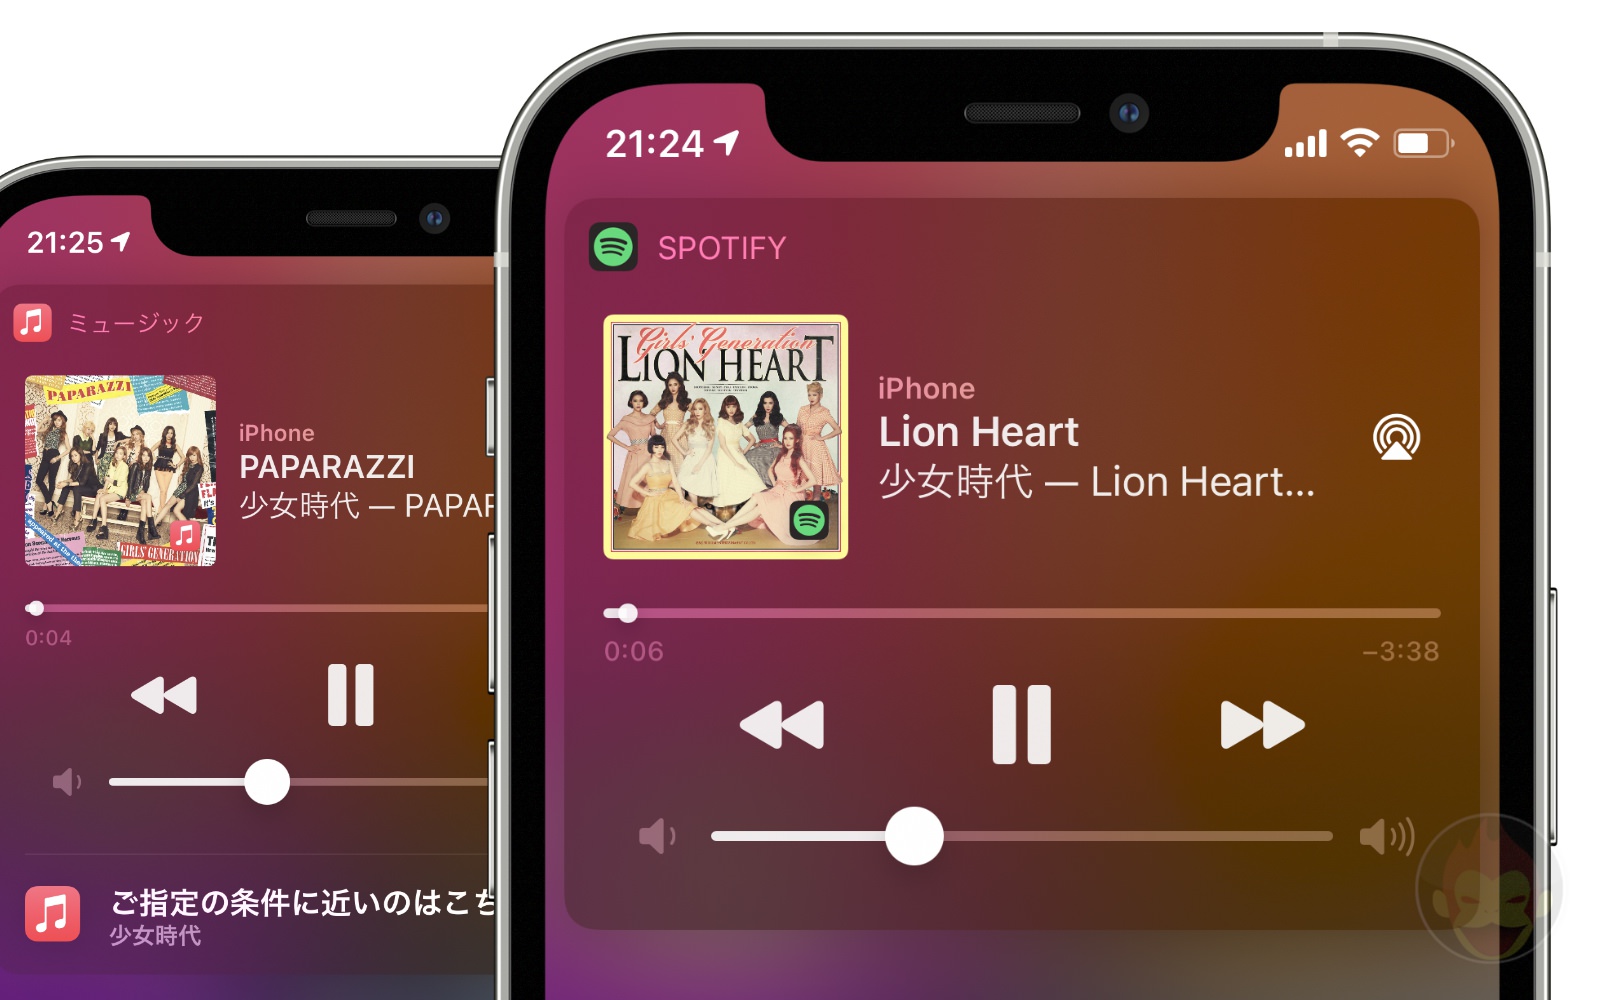 Spotify and AppleMusic by Siri